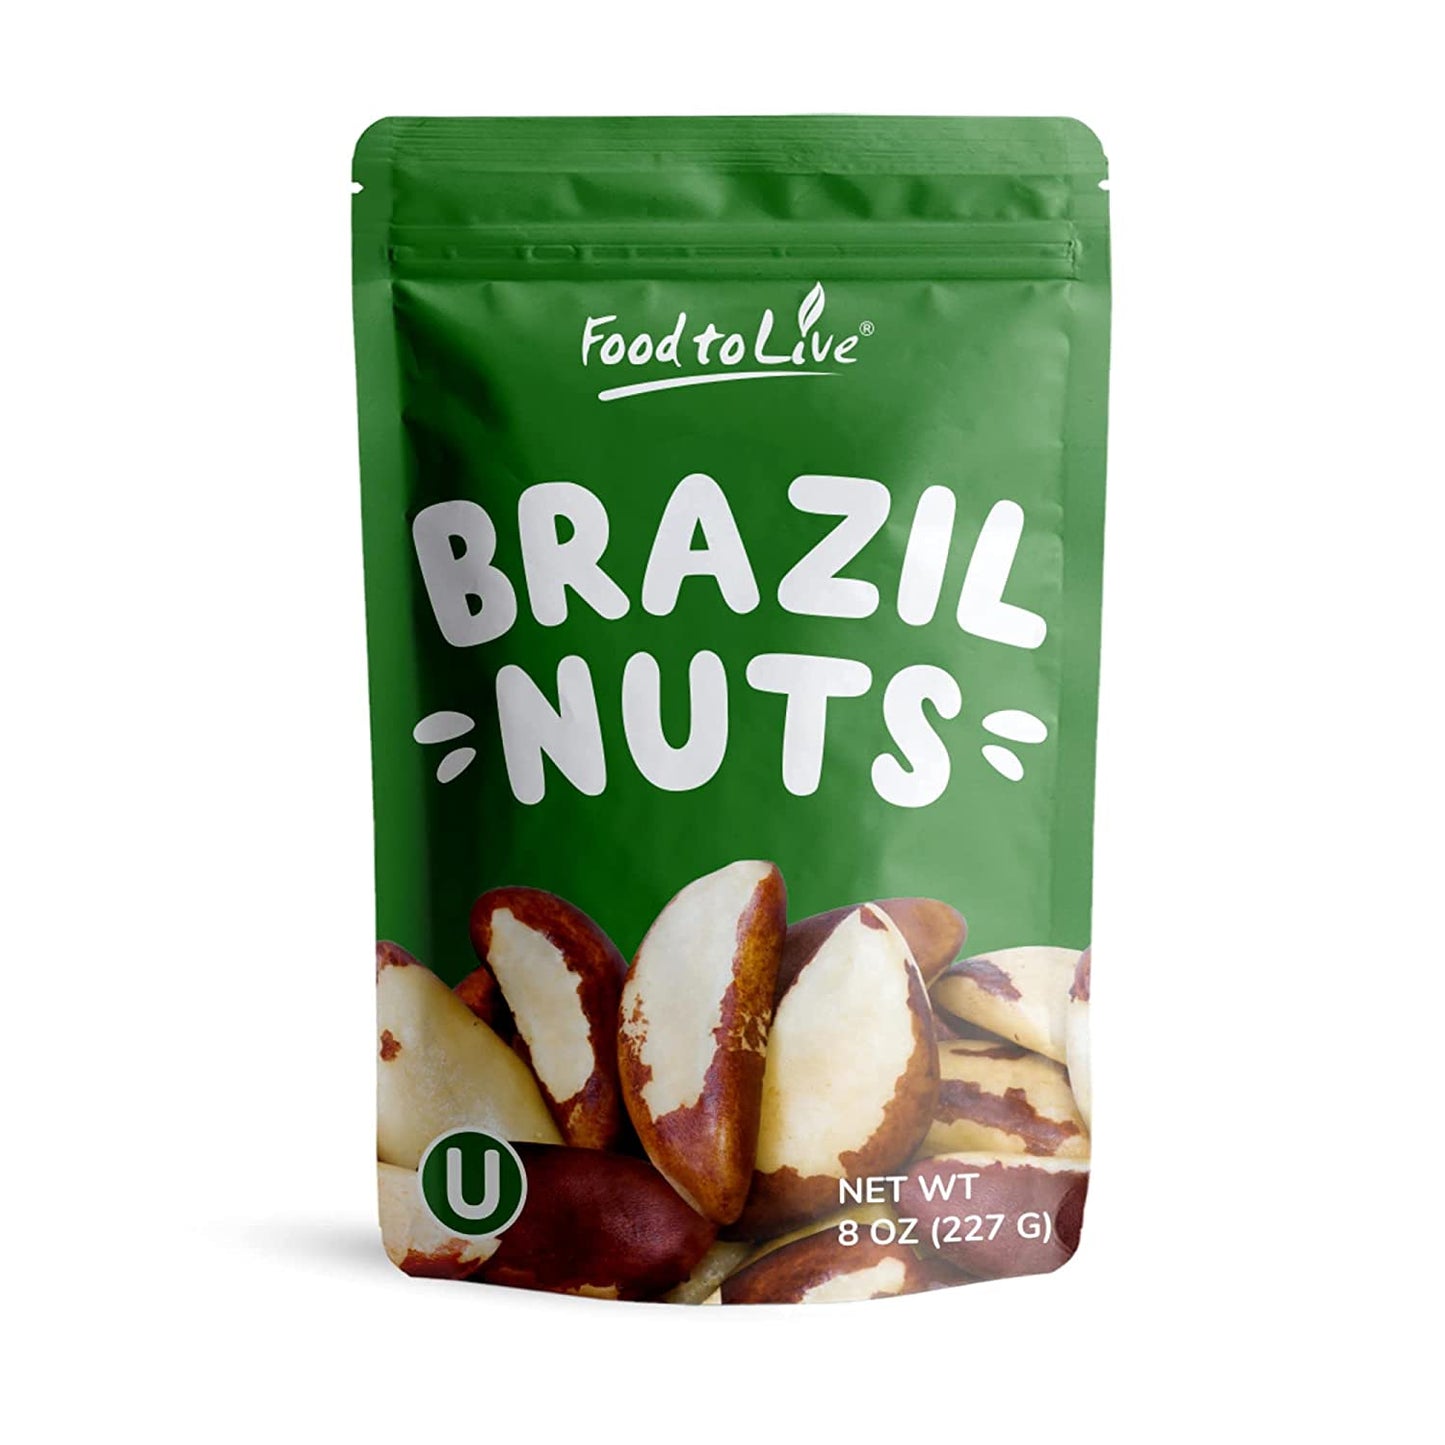 Dry Roasted Brazil Nuts – Unsalted, Whole, Oven Roasted Brazilian Nuts, No Oil Added, Shelled, Vegan, Kosher, Bulk. Good Source of Protein and Essential Fatty Acids. Crunchy Snack